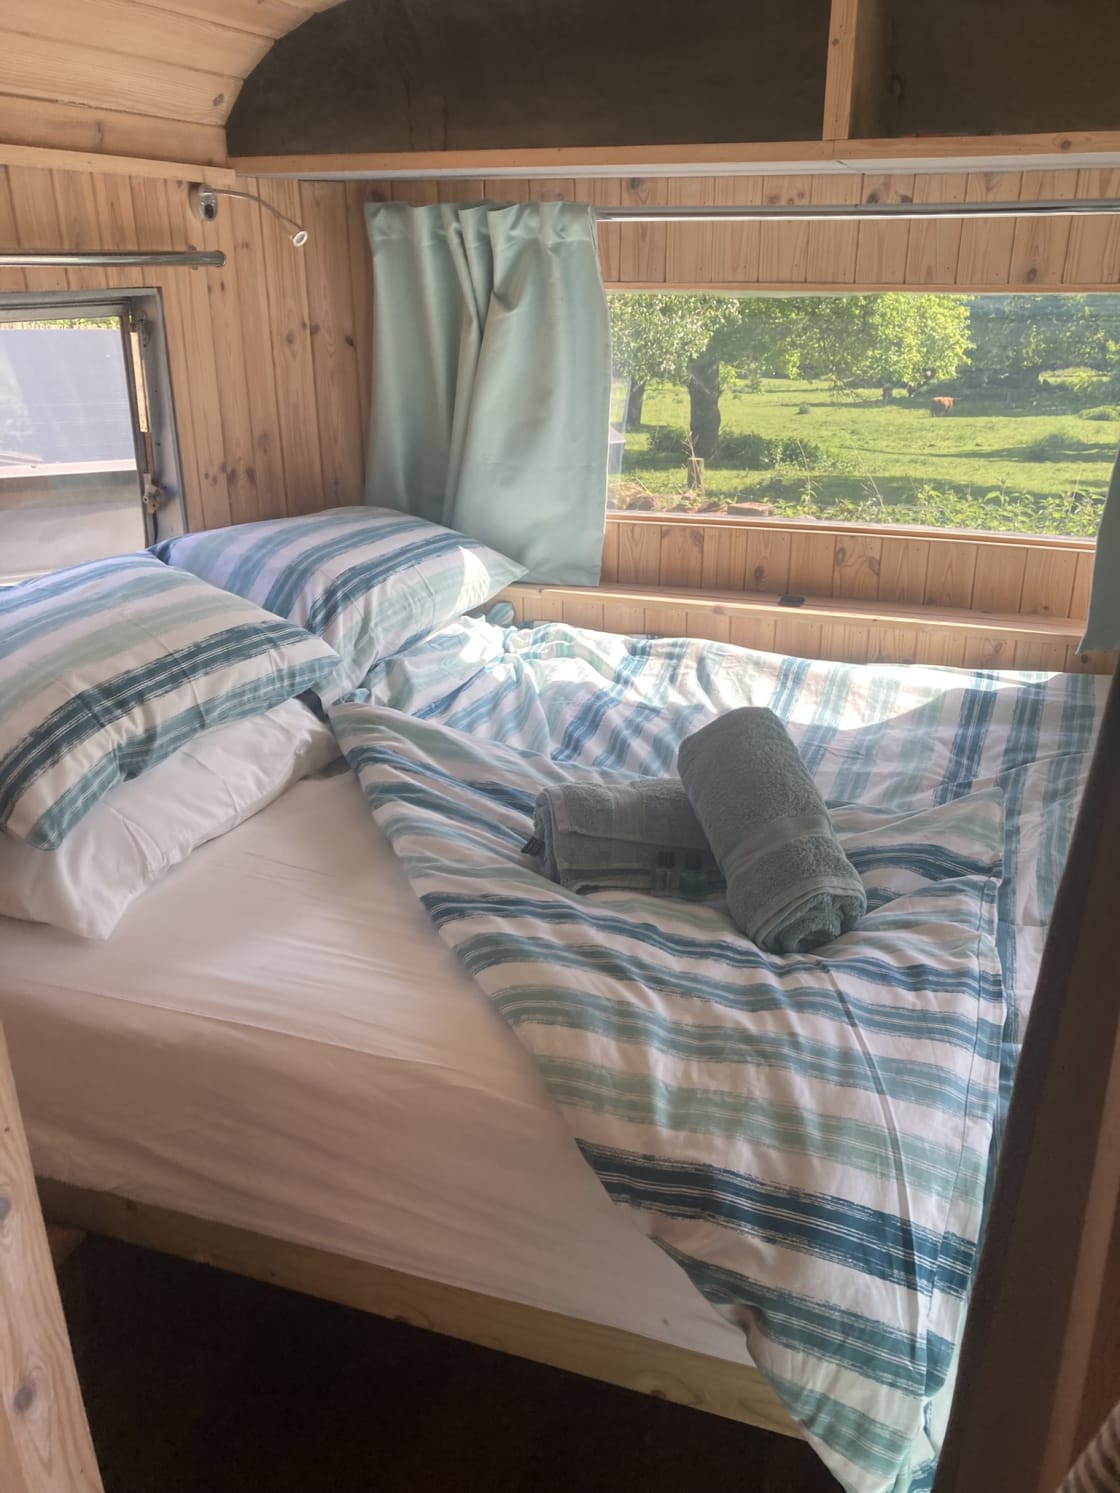 The Lazy Cow bedroom ...  check out your morning view!